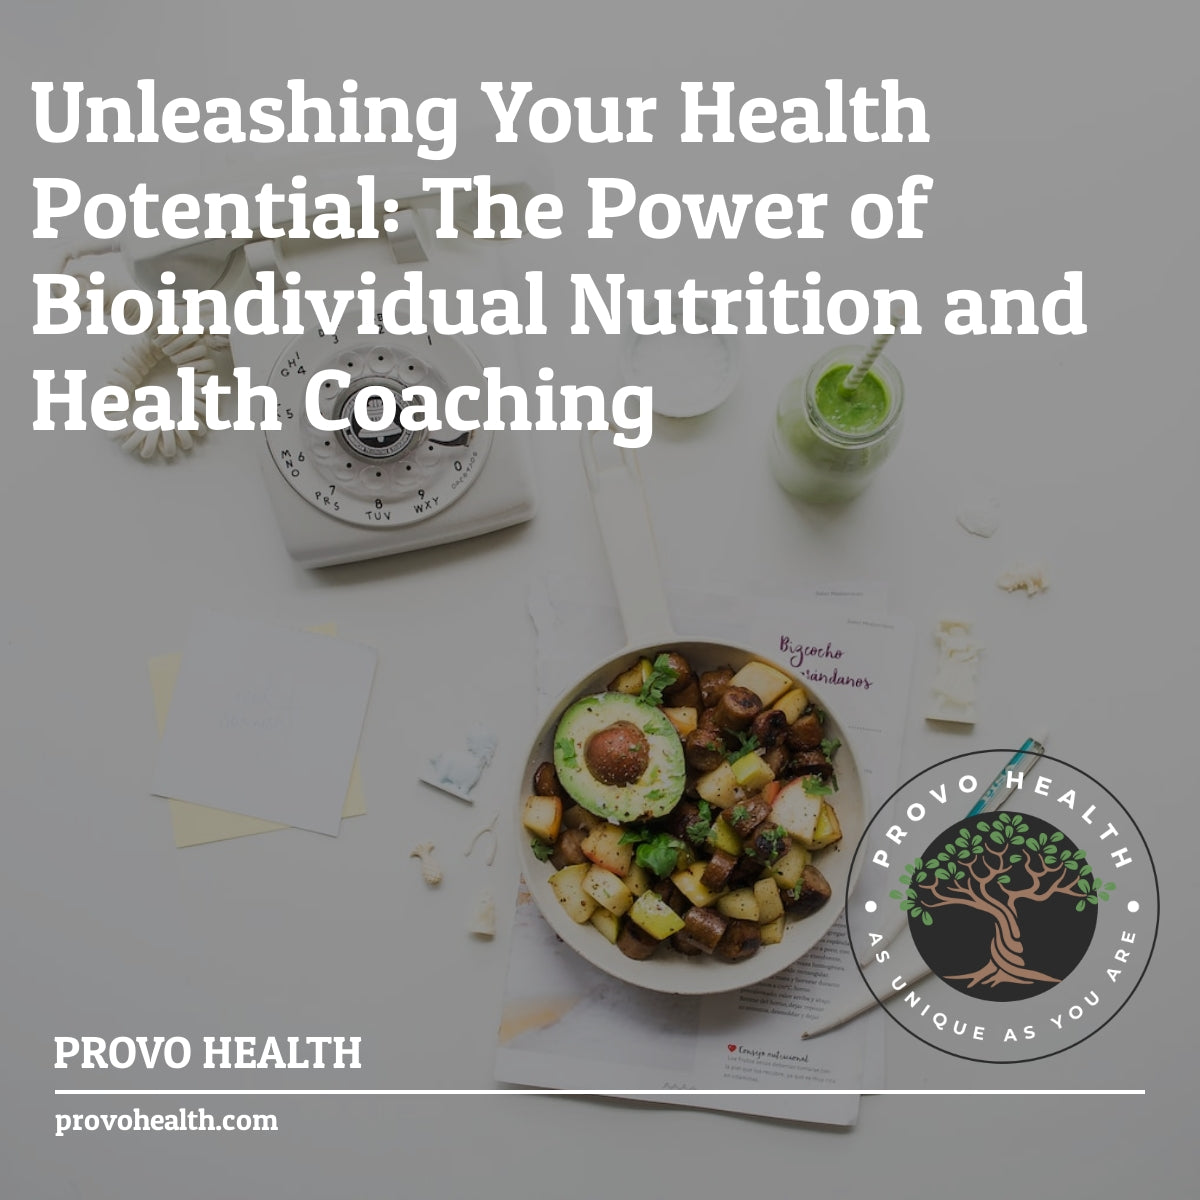 Unleashing Your Health Potential: The Power of Bioindividual Nutrition and Health Coaching